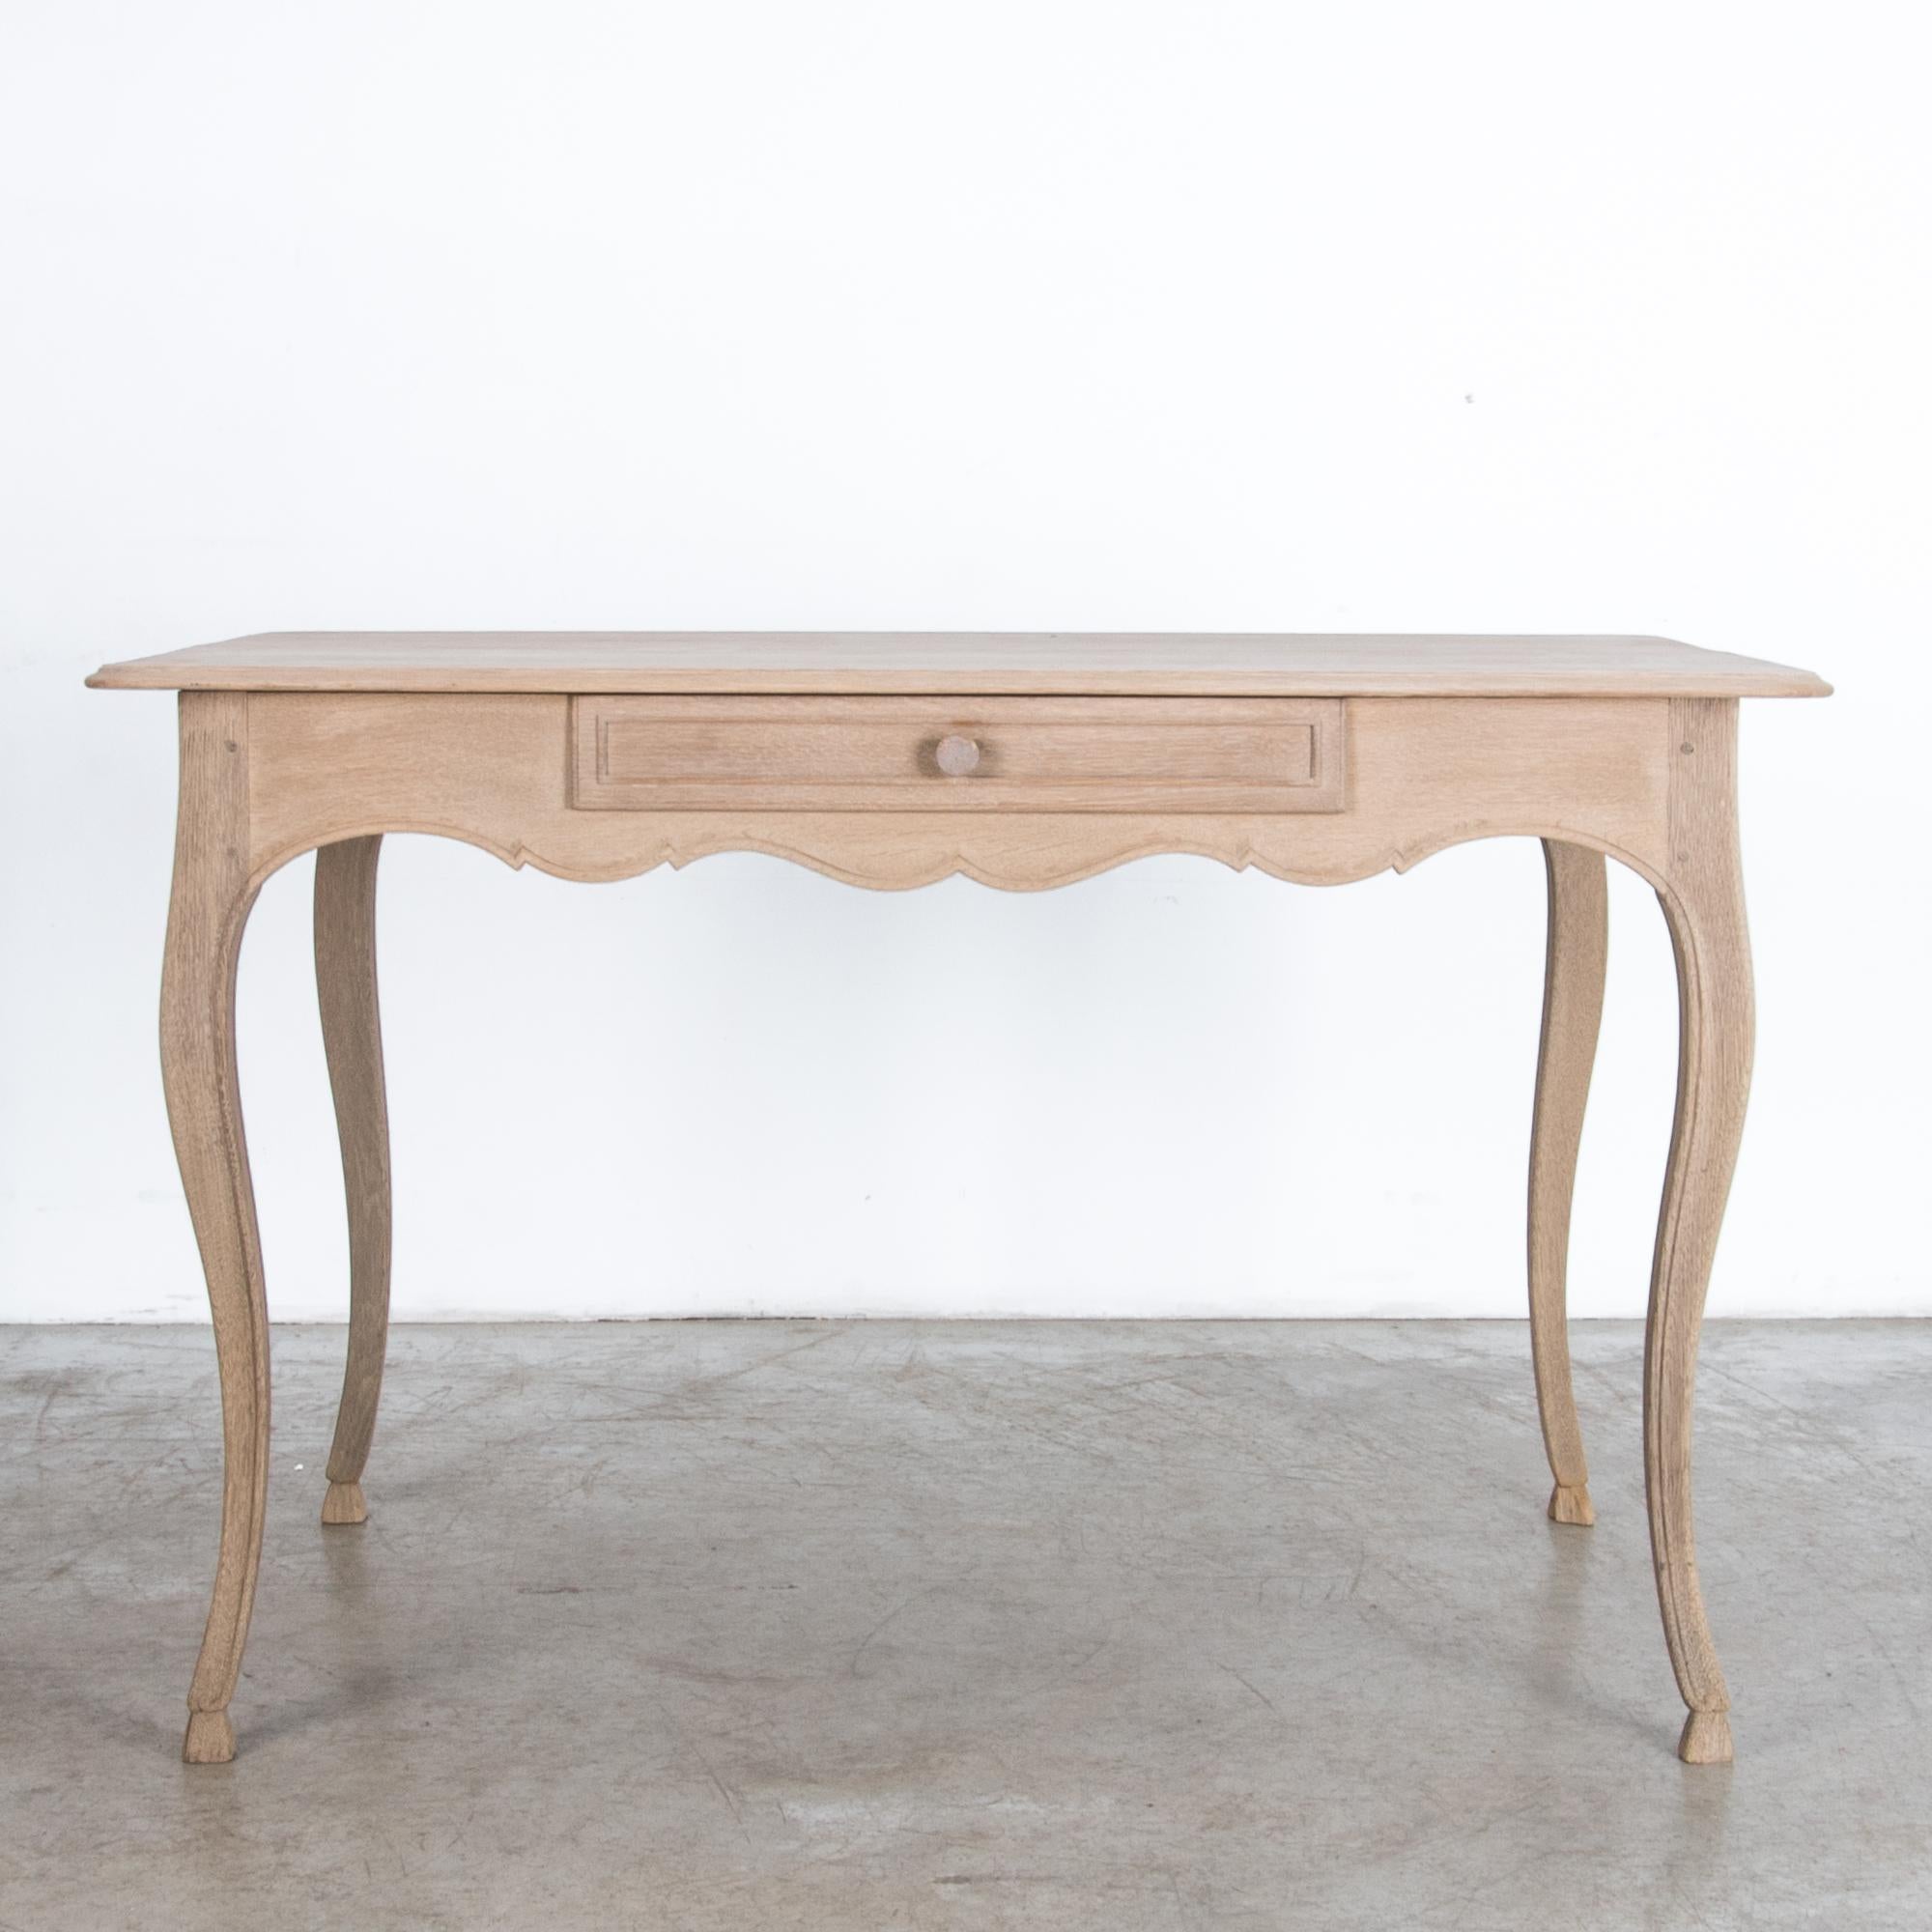 A simple oak table with center drawer, from France, circa 1900. Rustic yet refined, this oak table is crafted after the traditions of local craftsmen. Away from the capital, carpenters interpreted the latest fashion in pared down styles, recalling